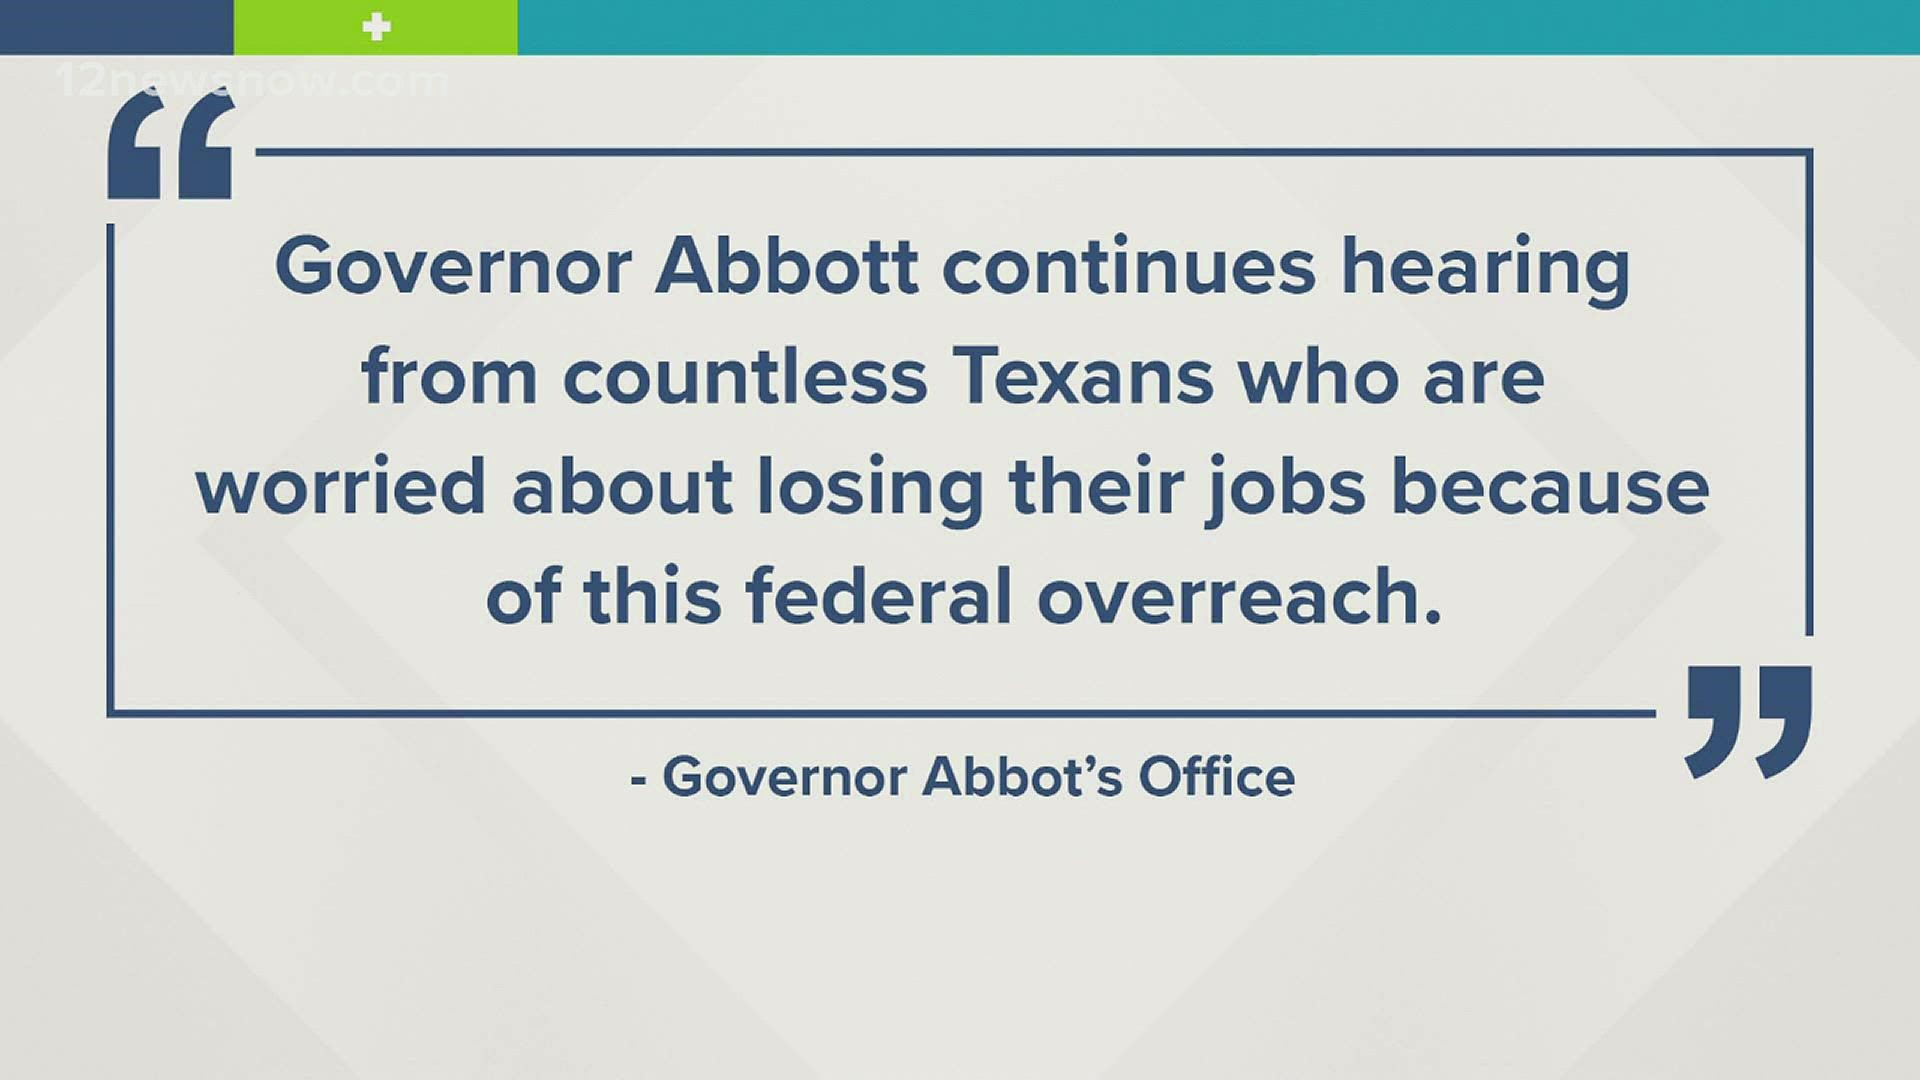 Gov. Greg Abbott released a statement highlighting the concerns of Texans.